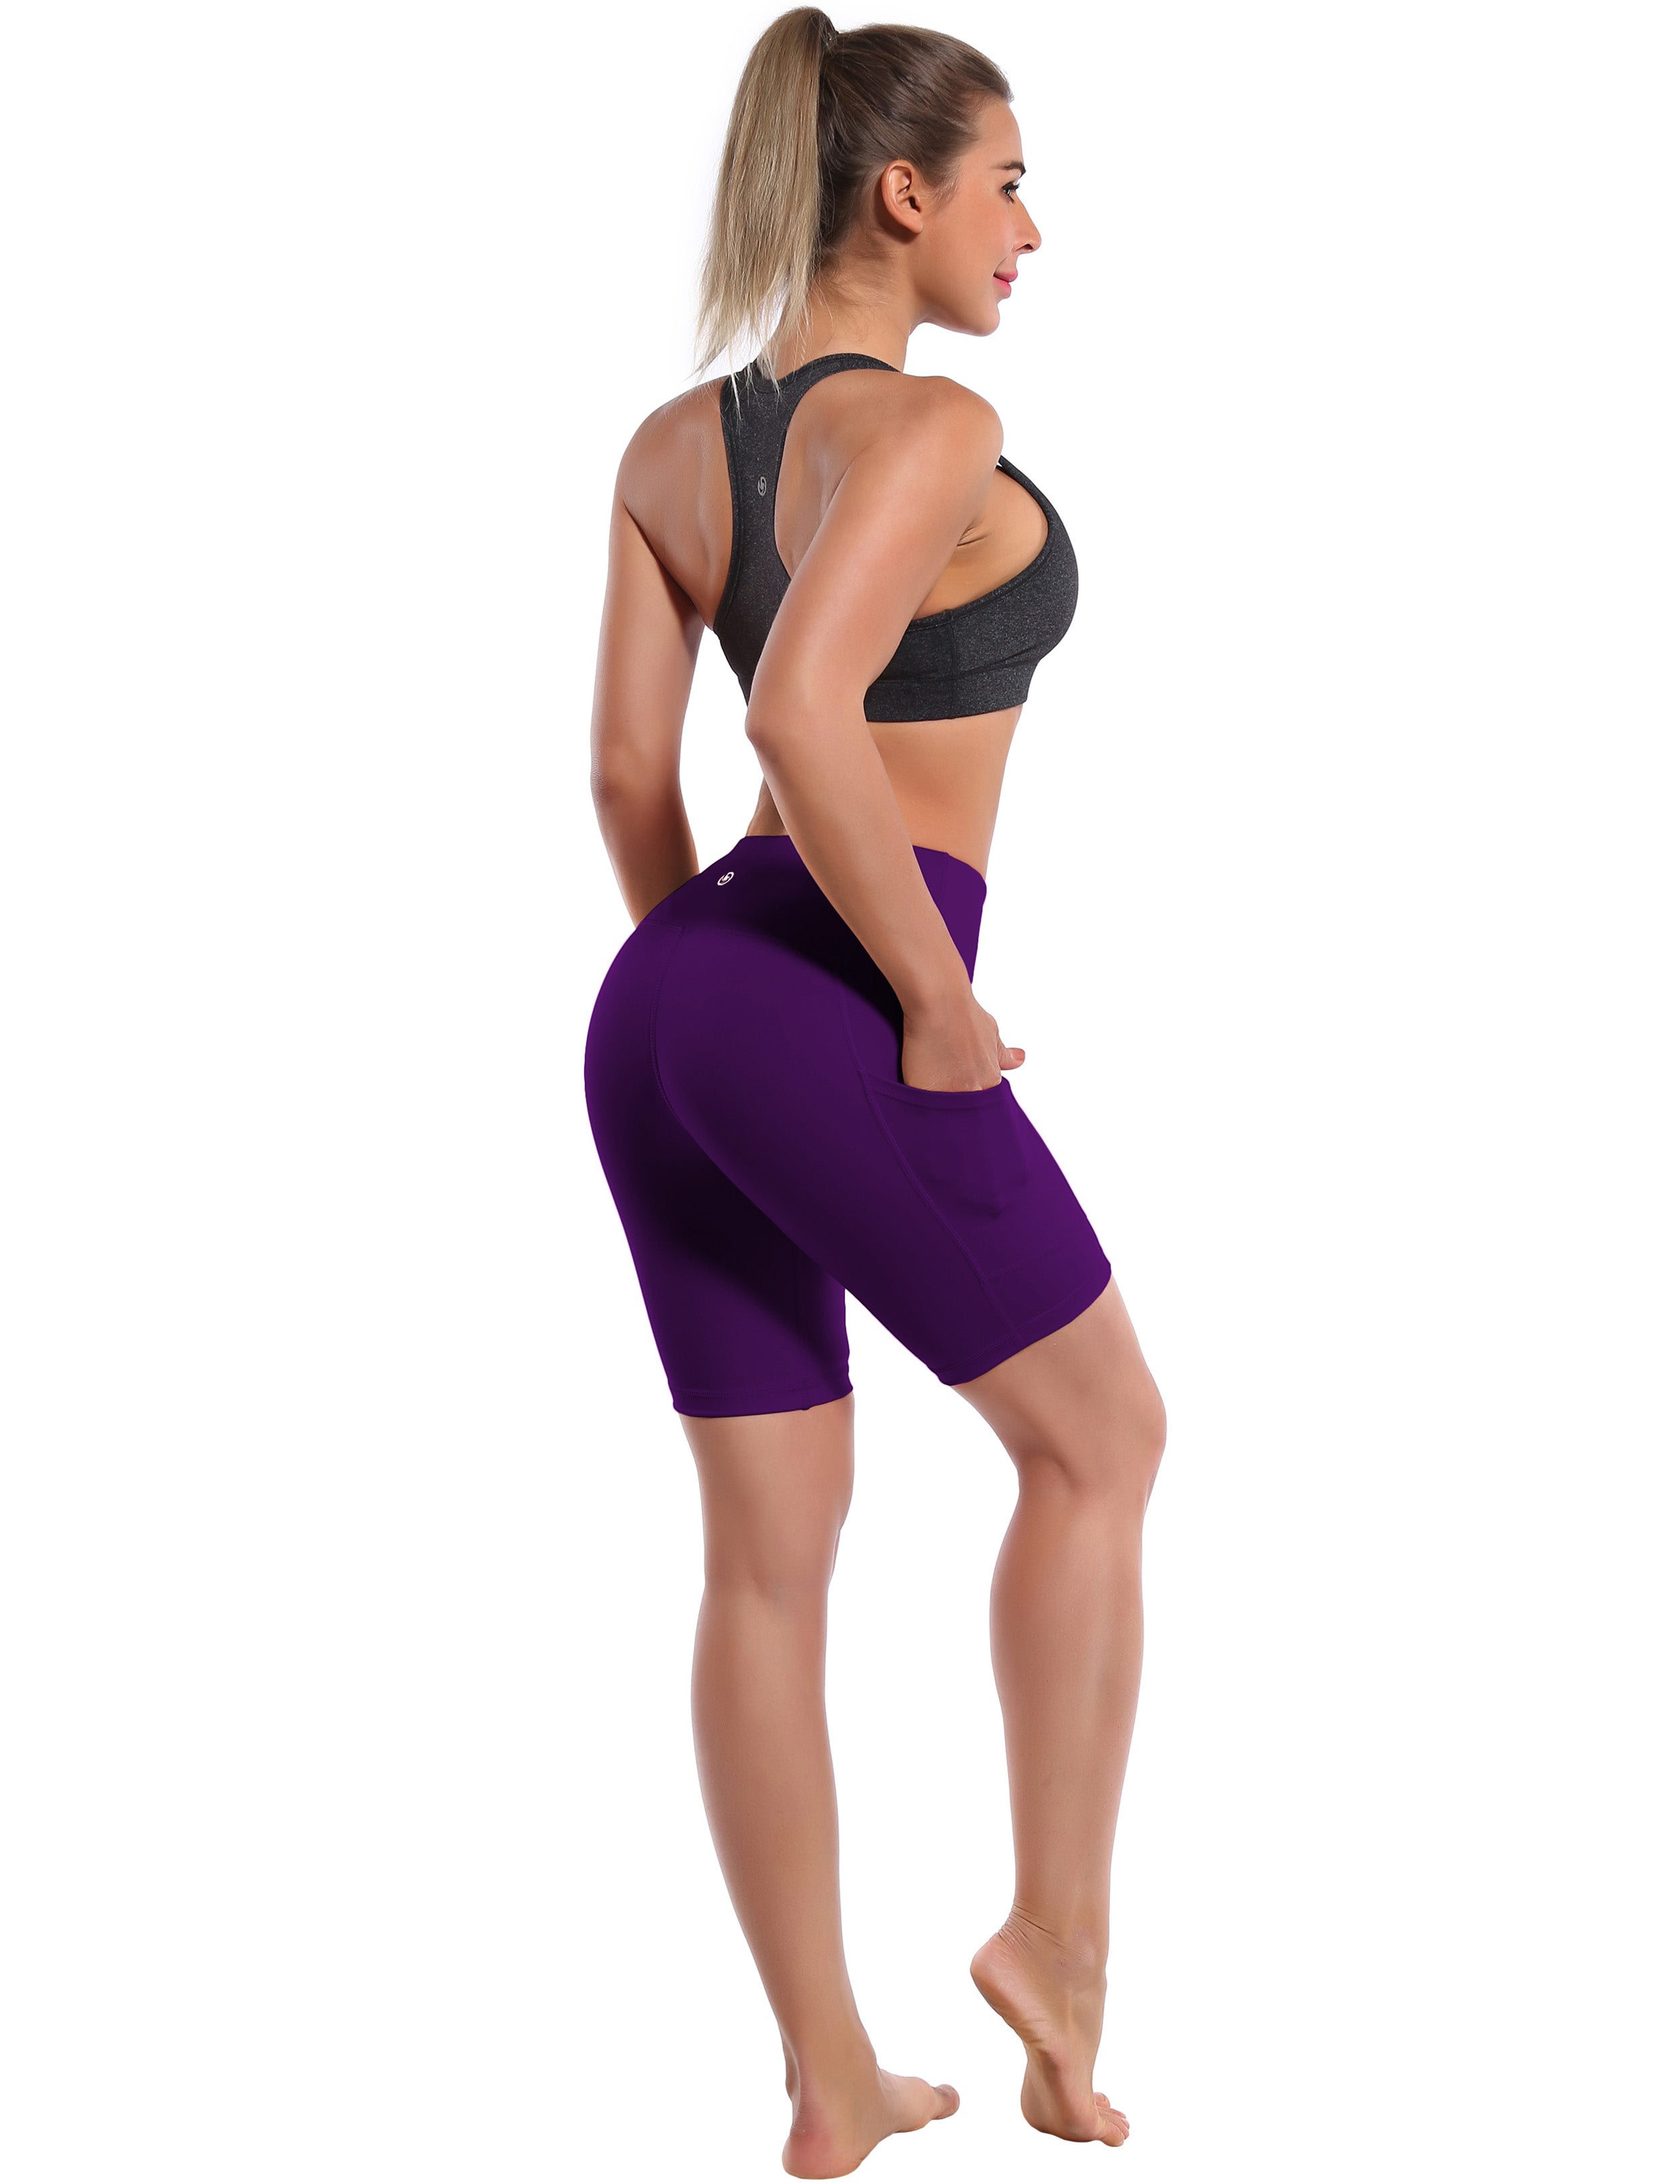 8" Side Pockets yogastudio Shorts eggplantpurple Sleek, soft, smooth and totally comfortable: our newest style is here. Softest-ever fabric High elasticity High density 4-way stretch Fabric doesn't attract lint easily No see-through Moisture-wicking Machine wash 75% Nylon, 25% Spandex